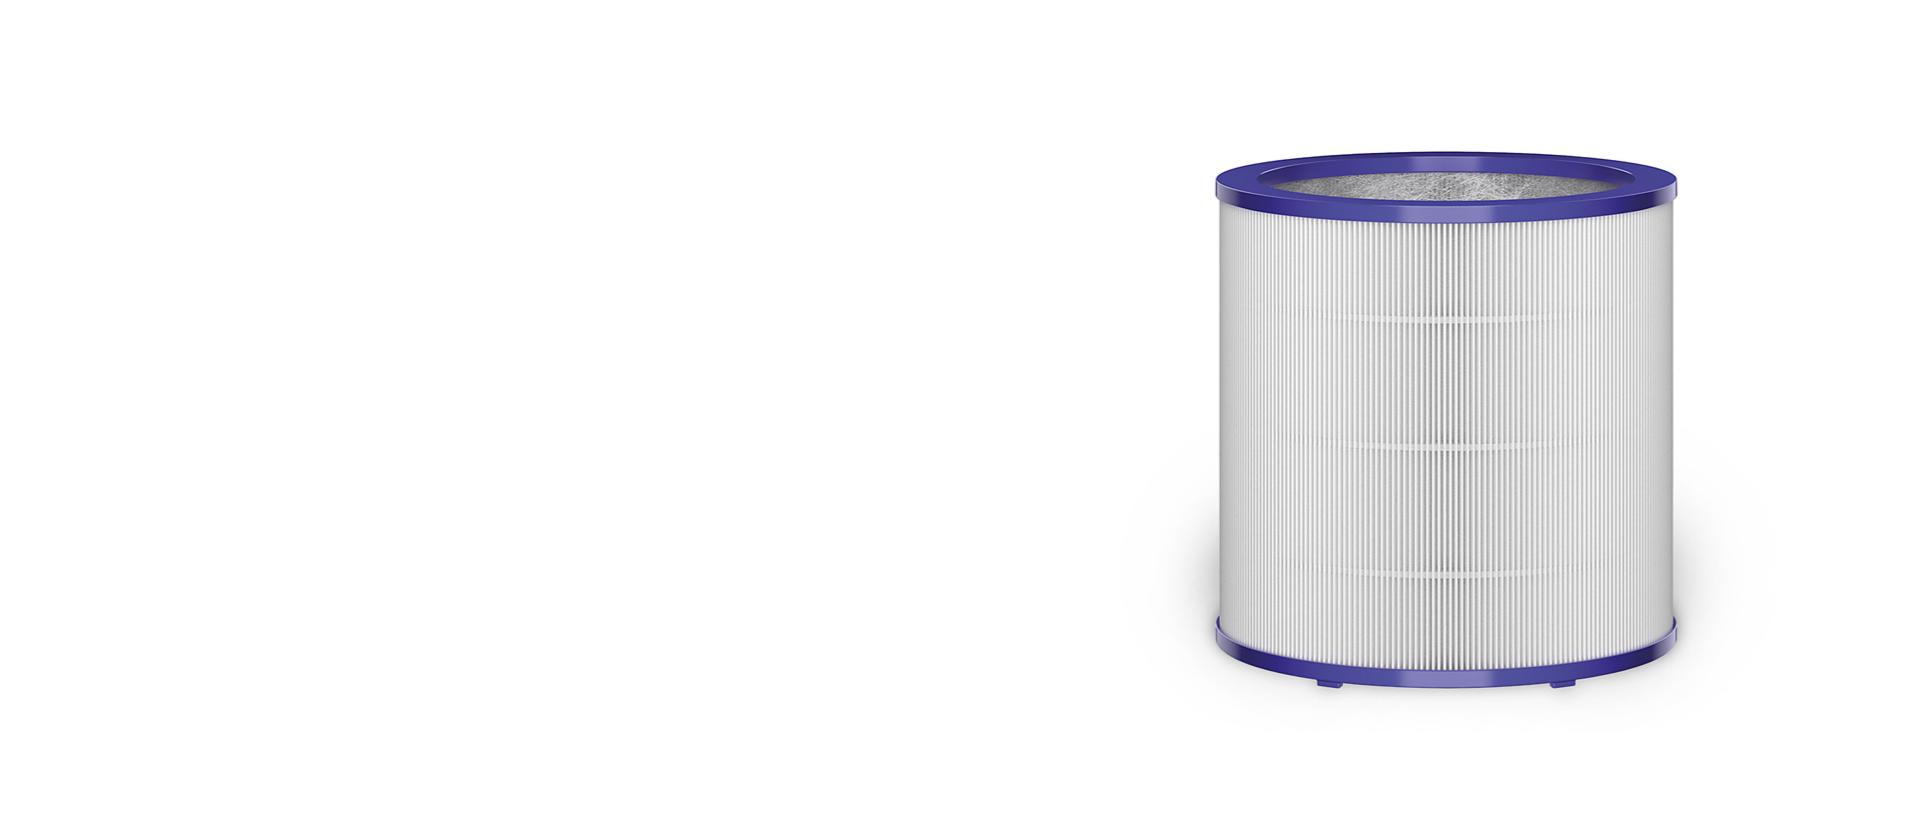 Dyson filter displayed for a sustainable vacuum.